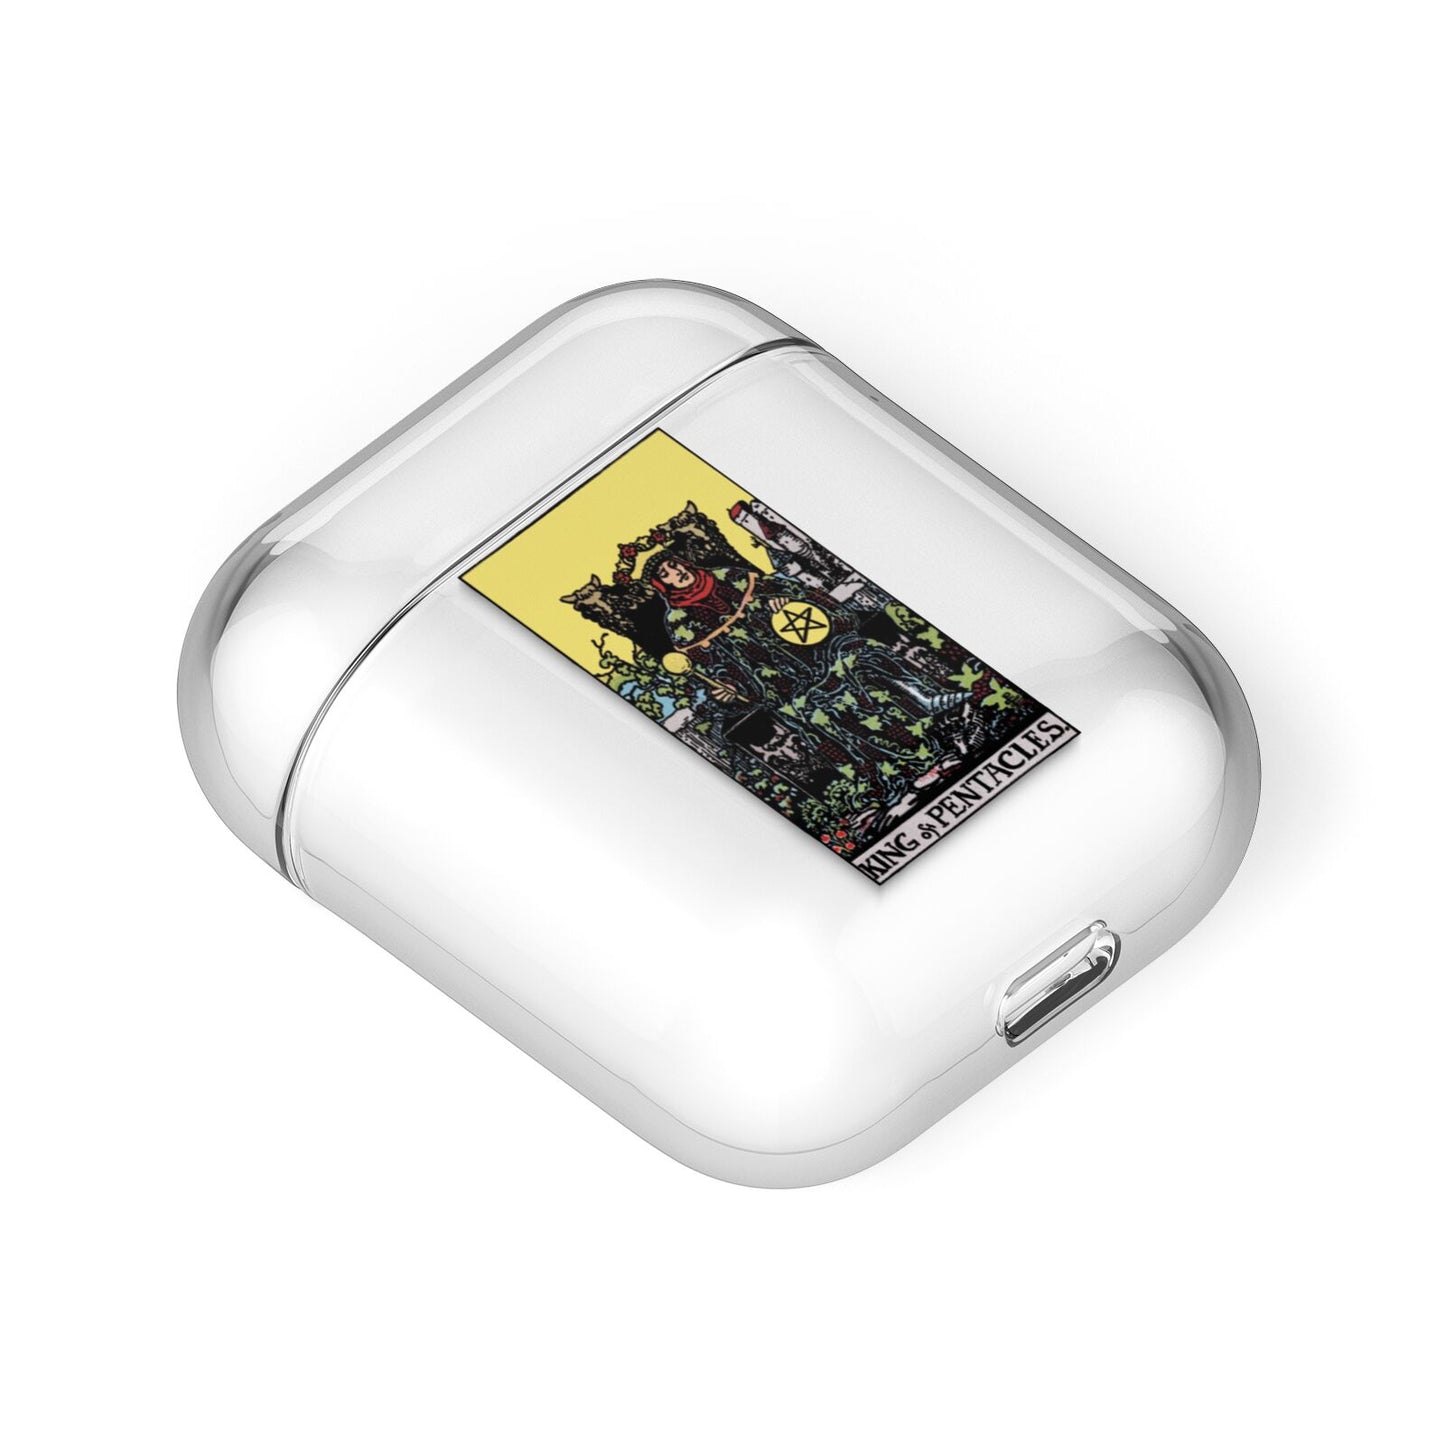 King of Pentacles Tarot Card AirPods Case Laid Flat